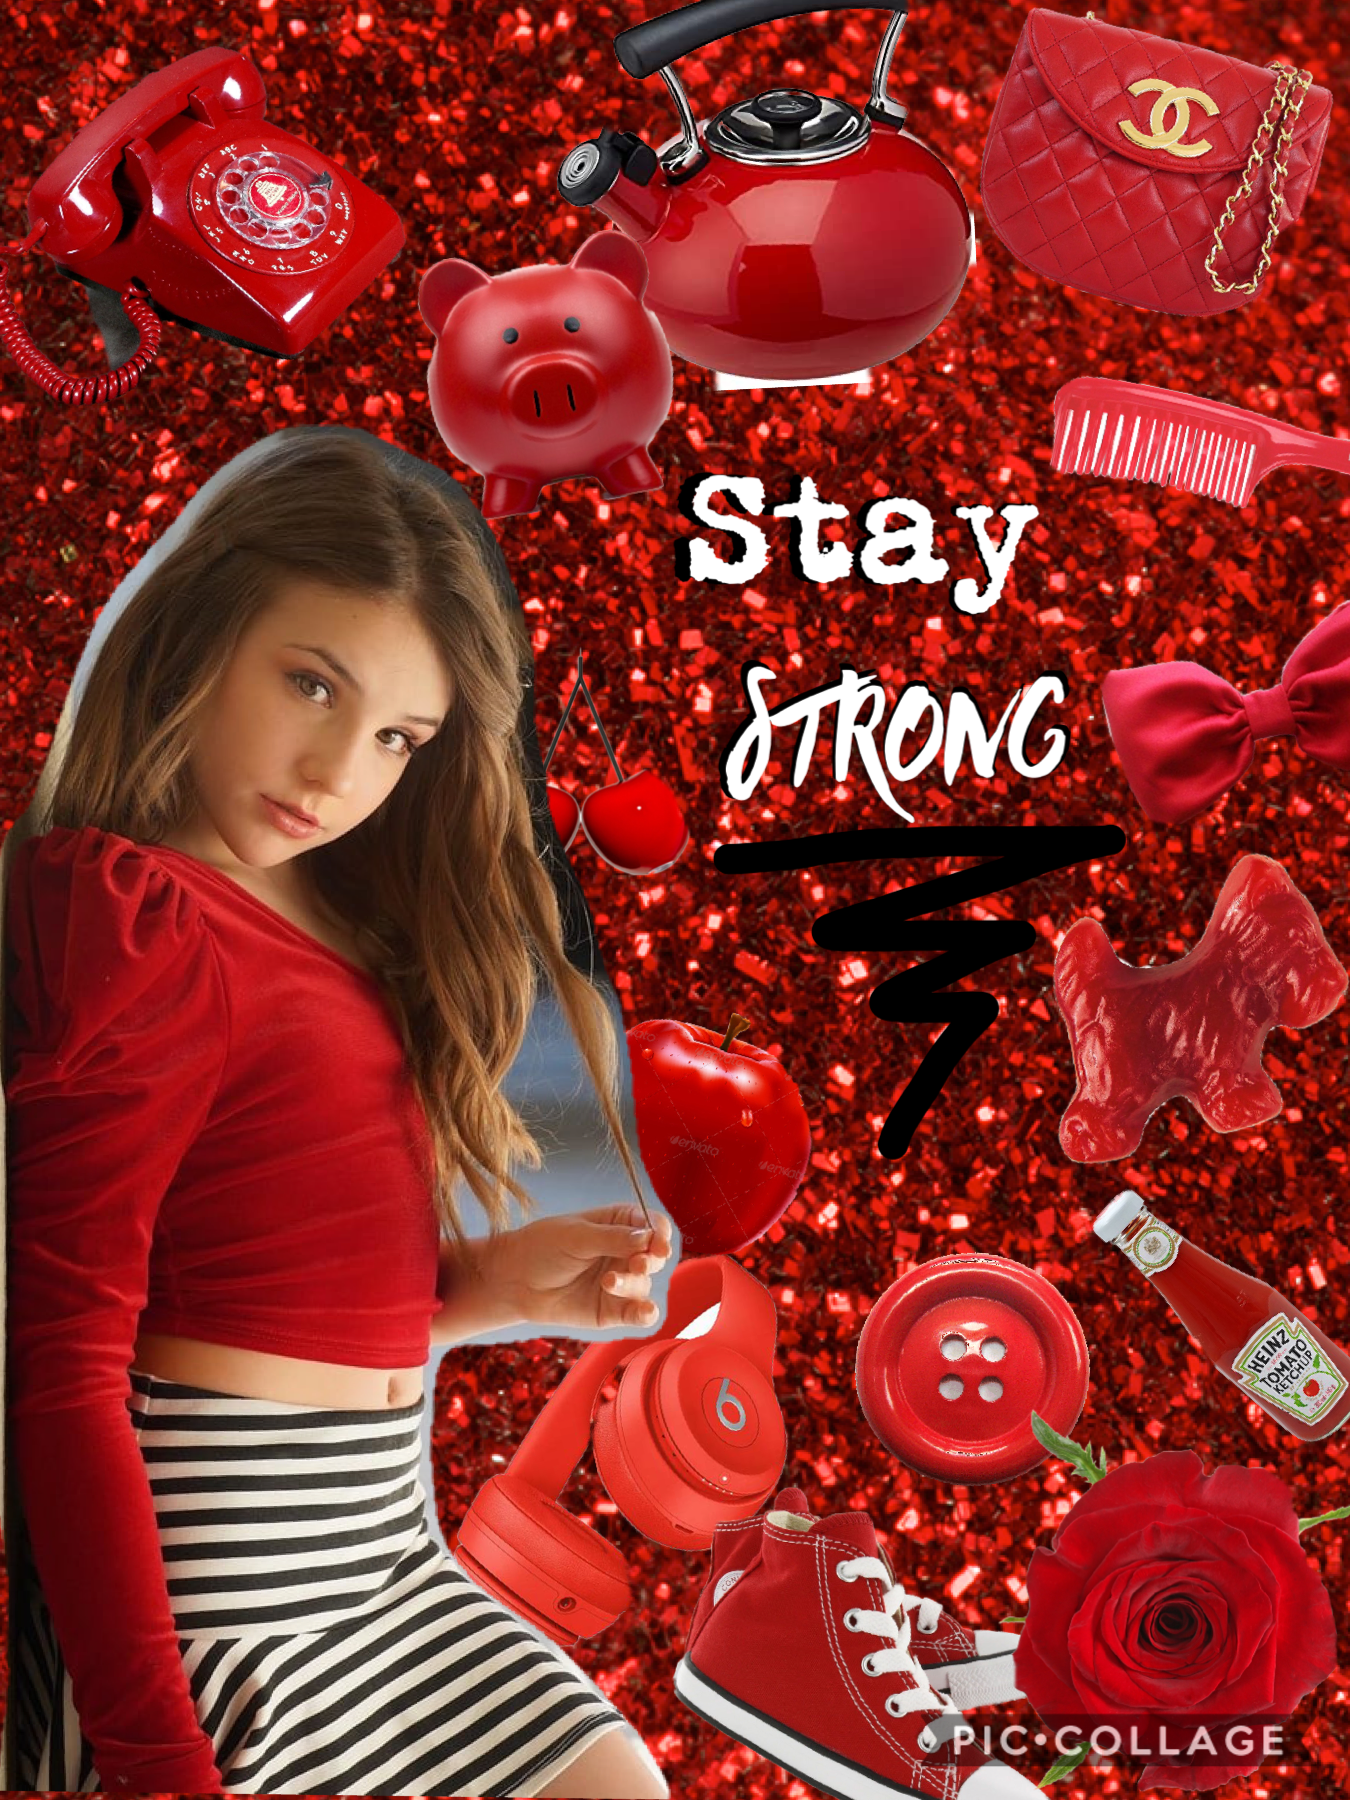 ❤️STAY STRONG AT HARD TIMESxx